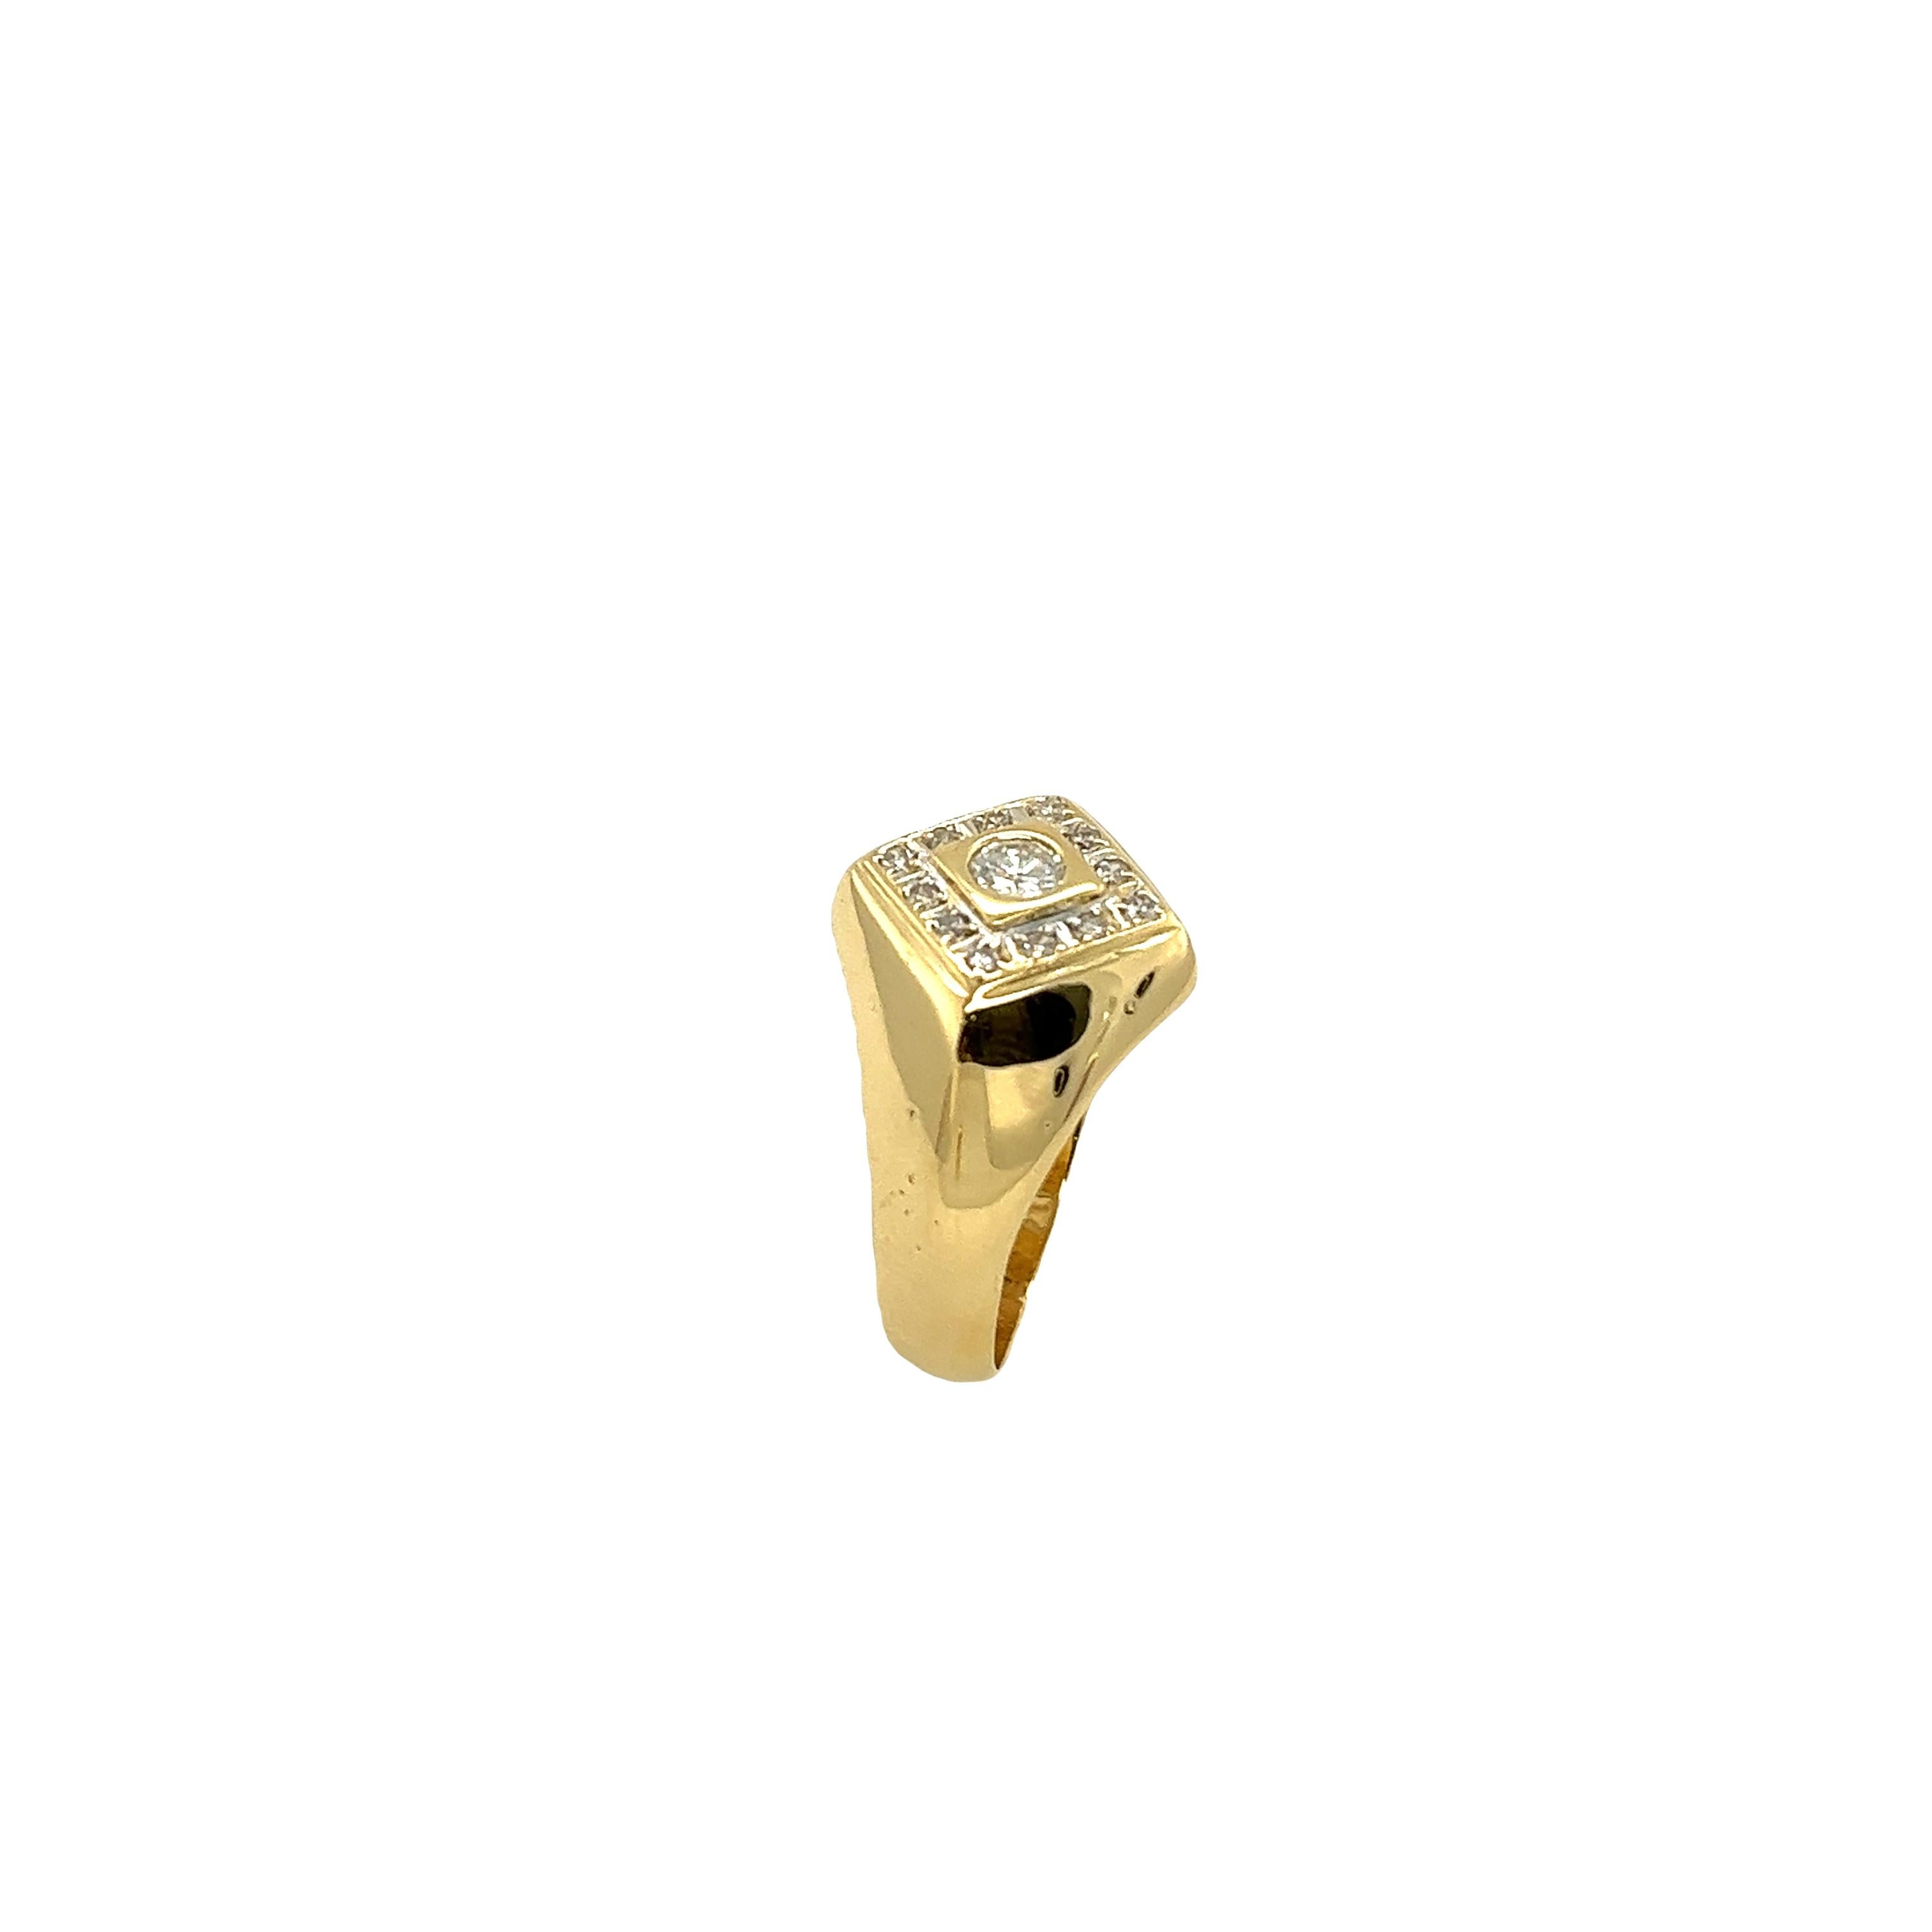 Round Cut 18ct Yellow Gold Diamond Signet Dress Ring Set With 0.30ct diamonds For Sale